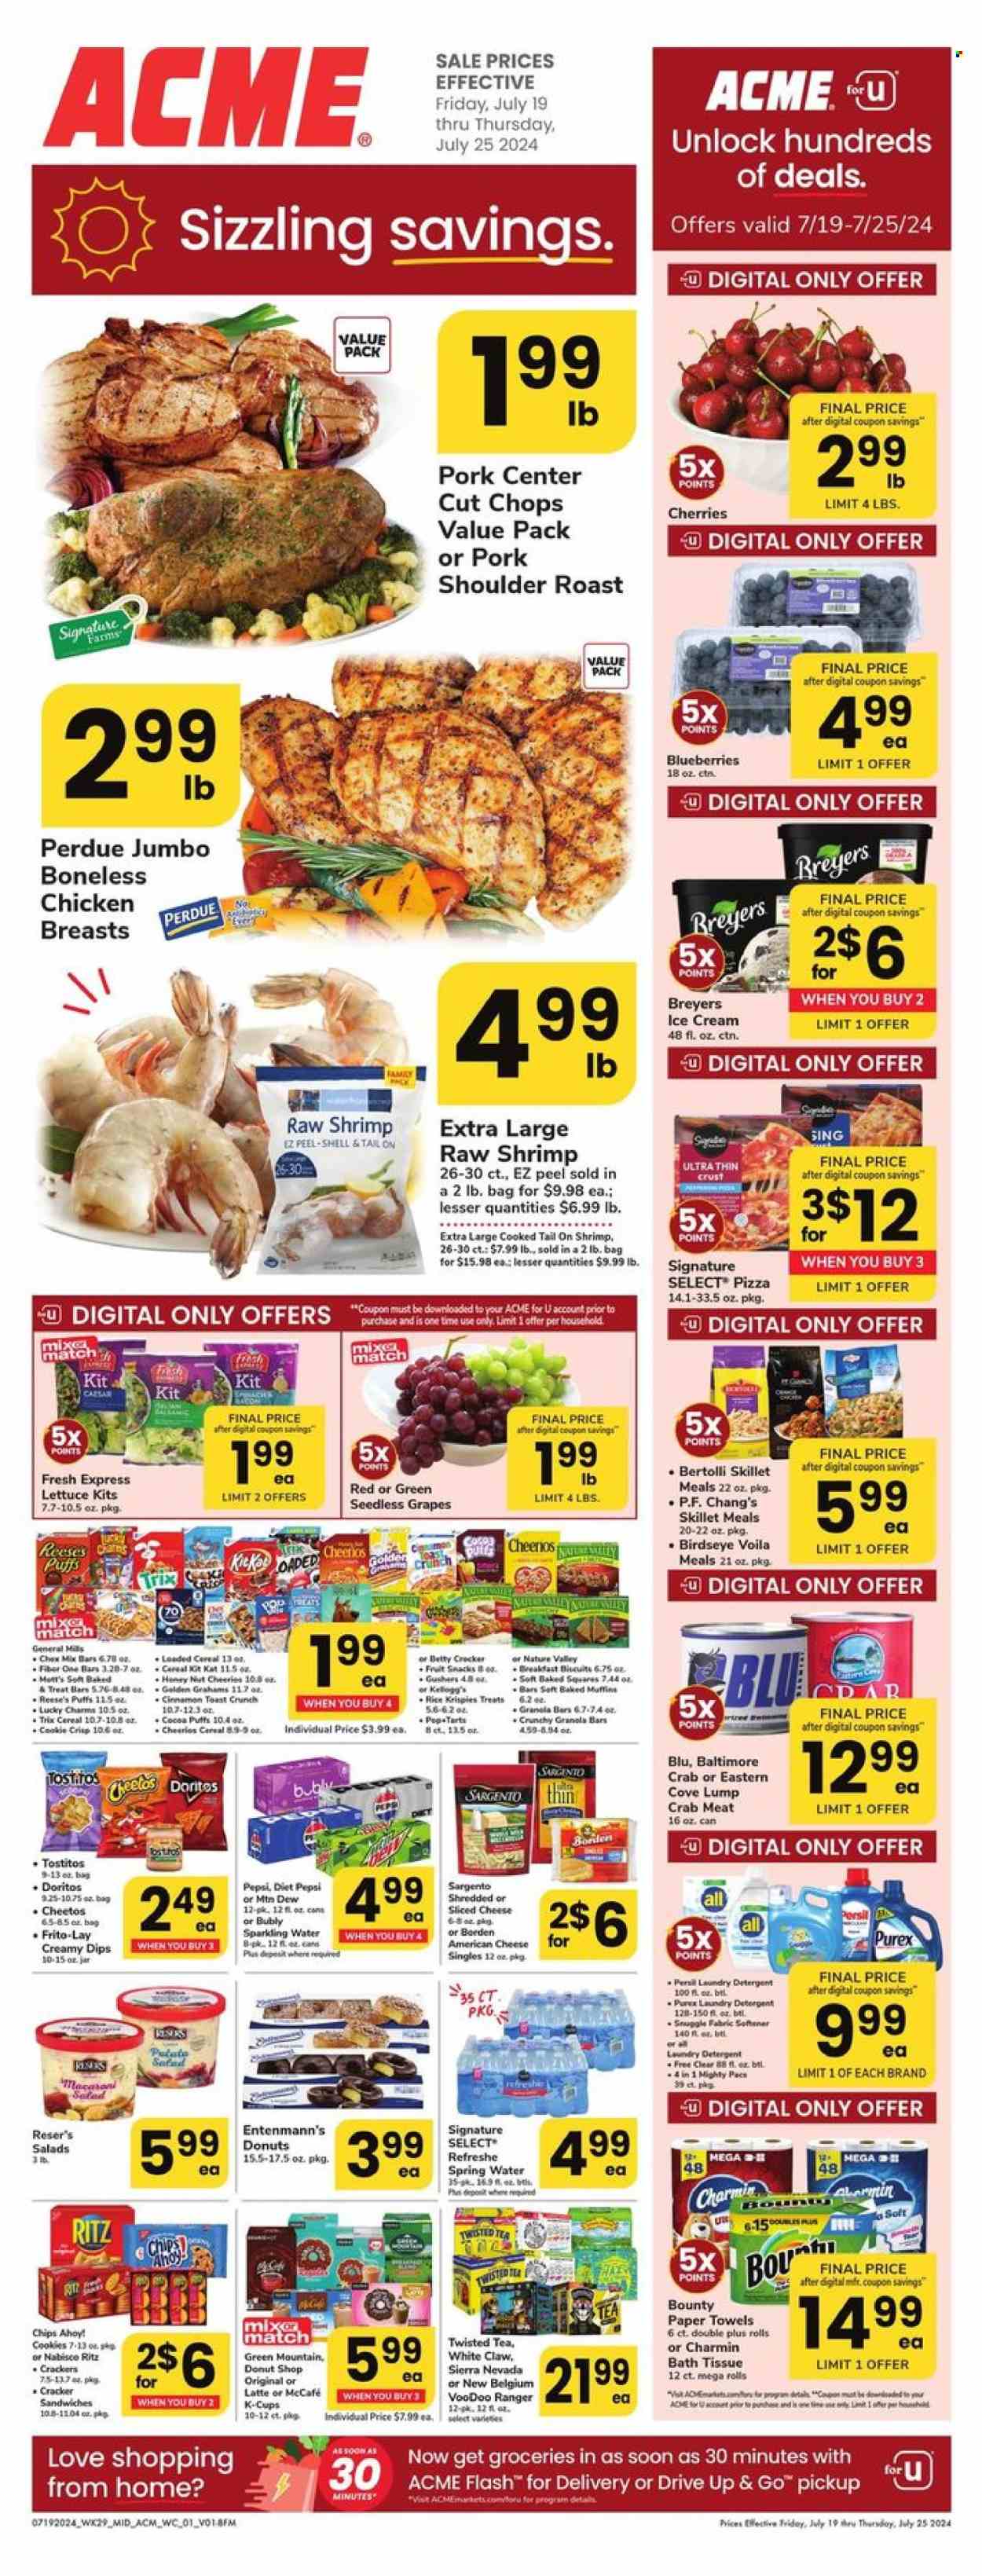 thumbnail - ACME Flyer - 07/19/2024 - 07/25/2024 - Sales products - muffin, puffs, Entenmann's, lettuce, salad, grapes, seedless grapes, Mott's, crab meat, seafood, crab, shrimps, pizza, pork roast, macaroni, pasta, Bird's Eye, Perdue®, Bertolli, roast, ready meal, american cheese, shredded cheese, sliced cheese, Sargento, snack bar, creamy dip, dip, ice cream, Reese's, Bounty, KitKat, crackers, Kellogg's, biscuit, fruit snack, Chips Ahoy!, RITZ, Nabisco, General Mills, Doritos, Cheetos, Frito-Lay, Tostitos, Chex Mix, salty snack, cereals, Cheerios, granola bar, Trix, Nature Valley, Fiber One, Mountain Dew, Pepsi, ice tea, Diet Pepsi, soft drink, spring water, water, carbonated soft drink, coffee, coffee capsules, McCafe, K-Cups, Green Mountain, White Claw, Hard Seltzer, beer, bath tissue, kitchen towels, paper towels, Charmin, detergent, Snuggle, Persil, fabric softener, laundry detergent, Purex, Twisted Tea. Page 1.